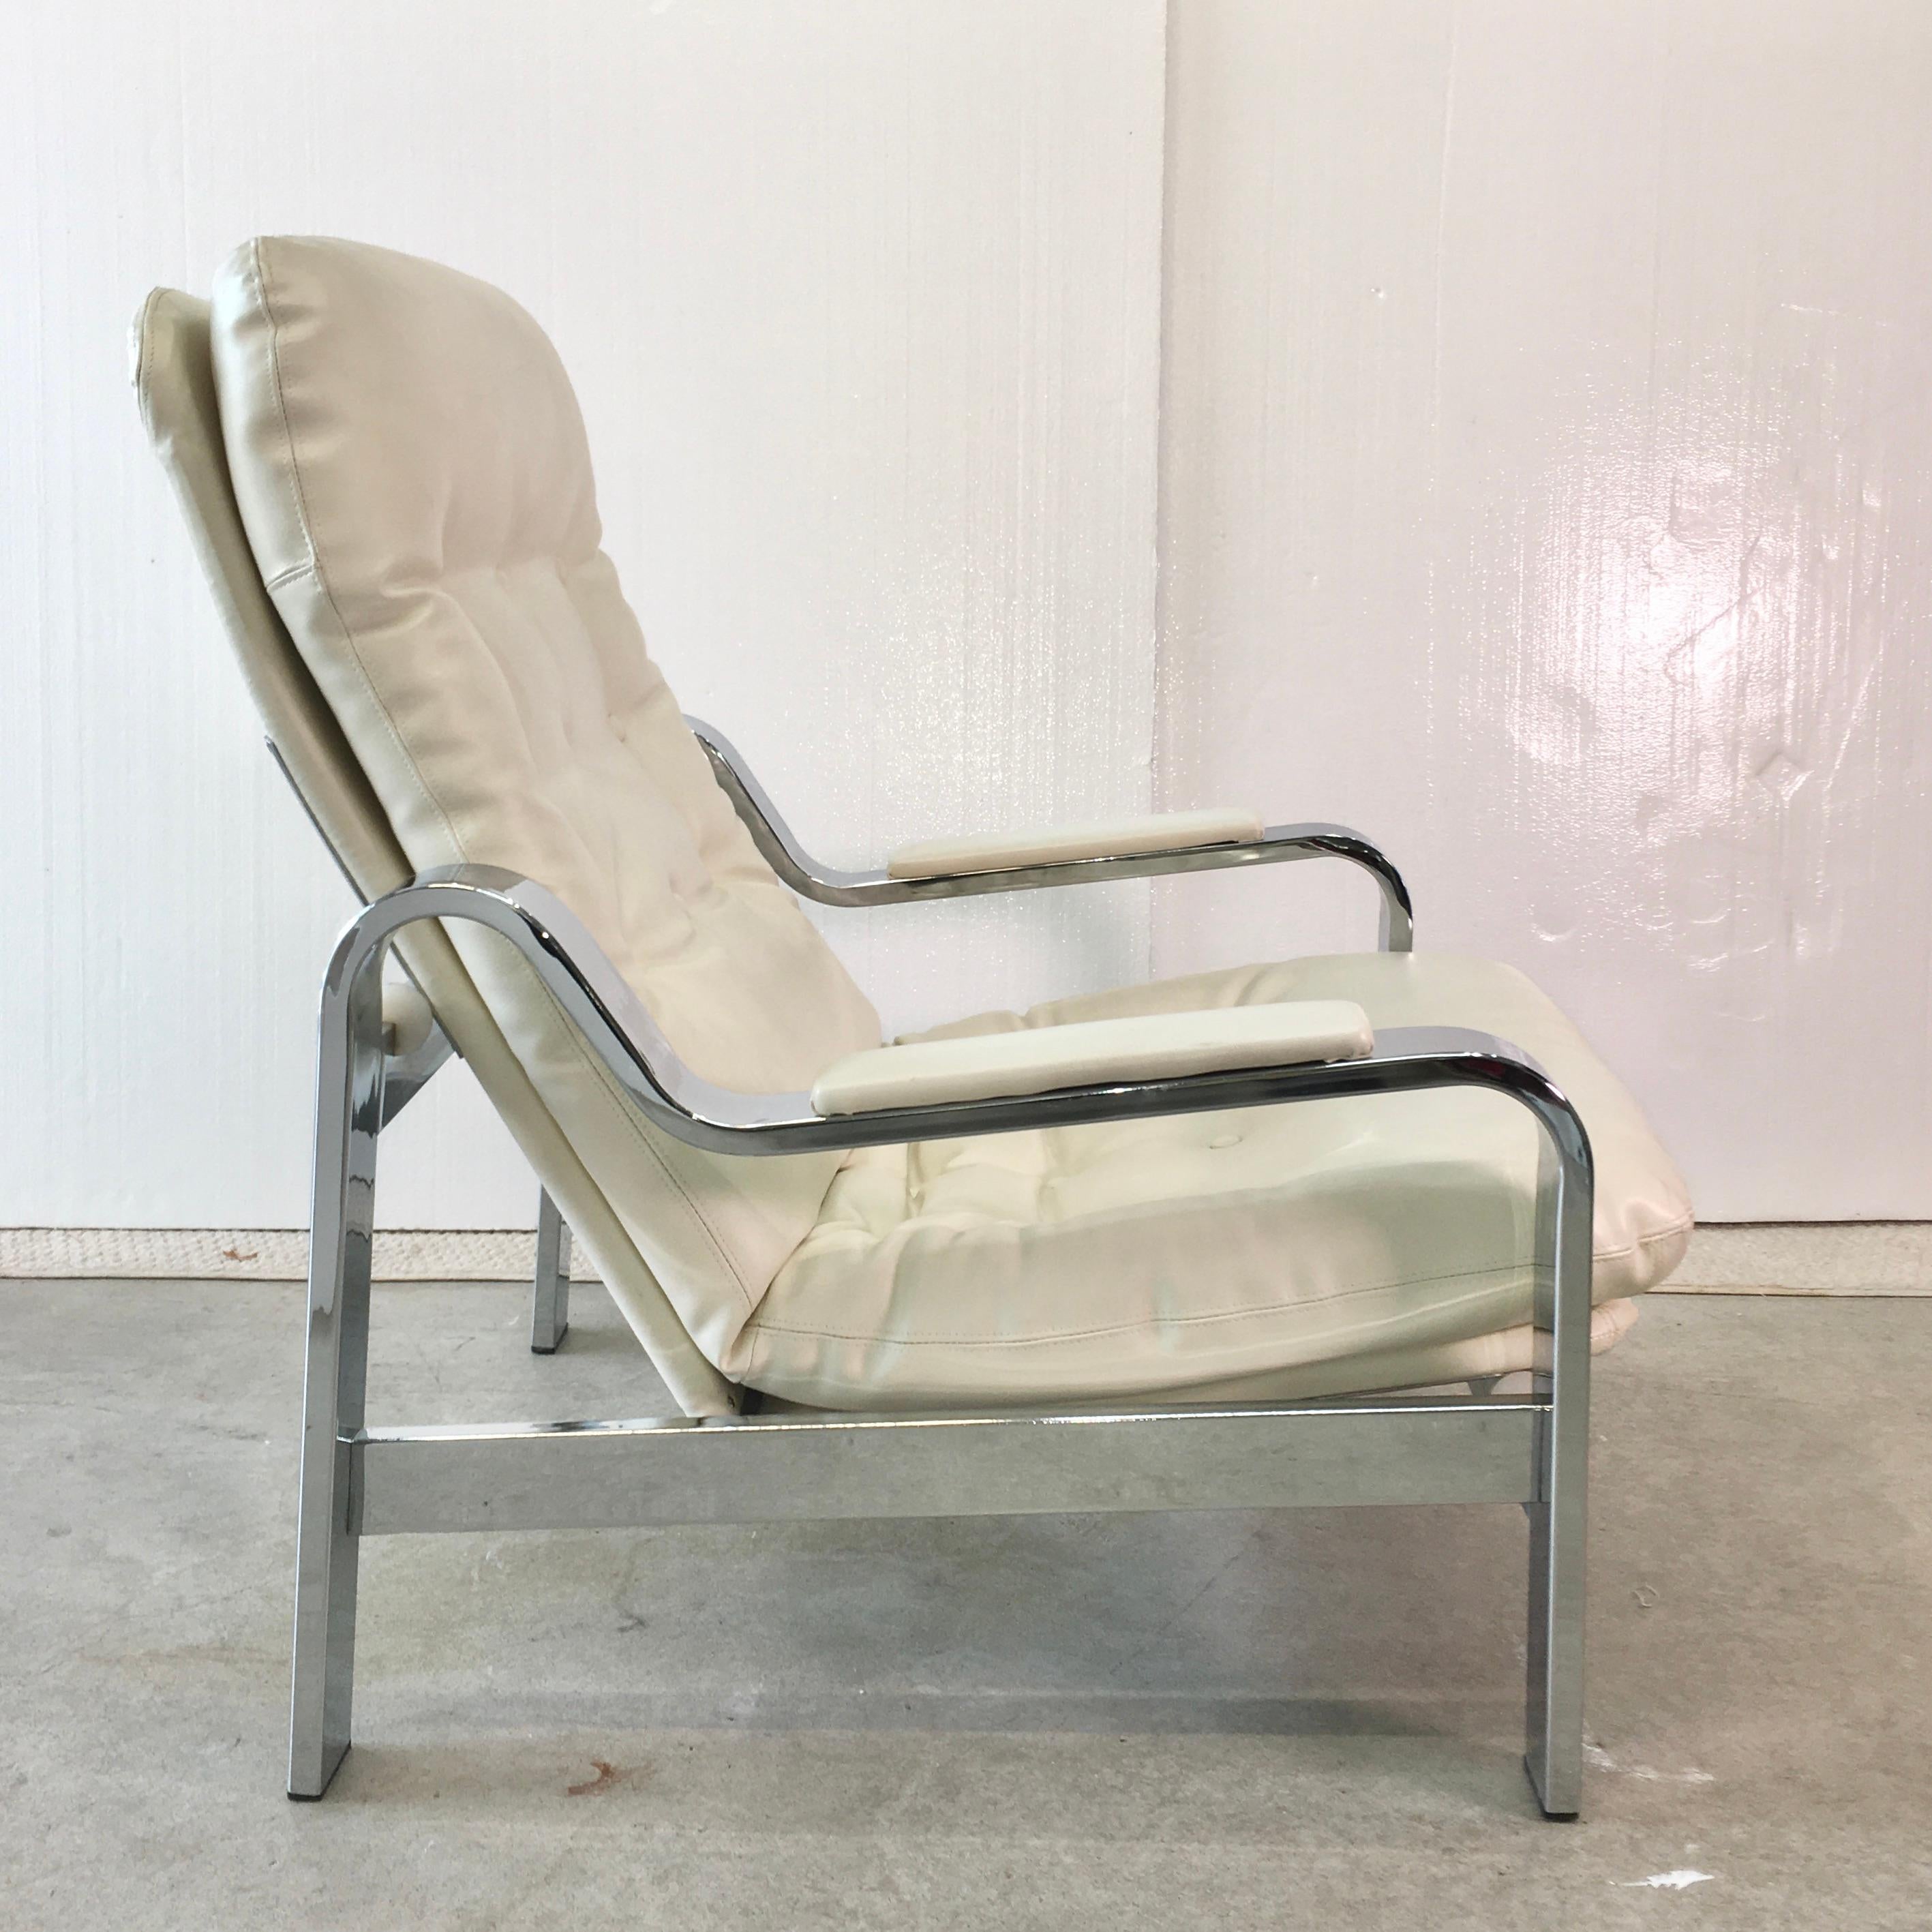 Selig 1970s Chrome Reclining Lounge Chair with Ottoman 9